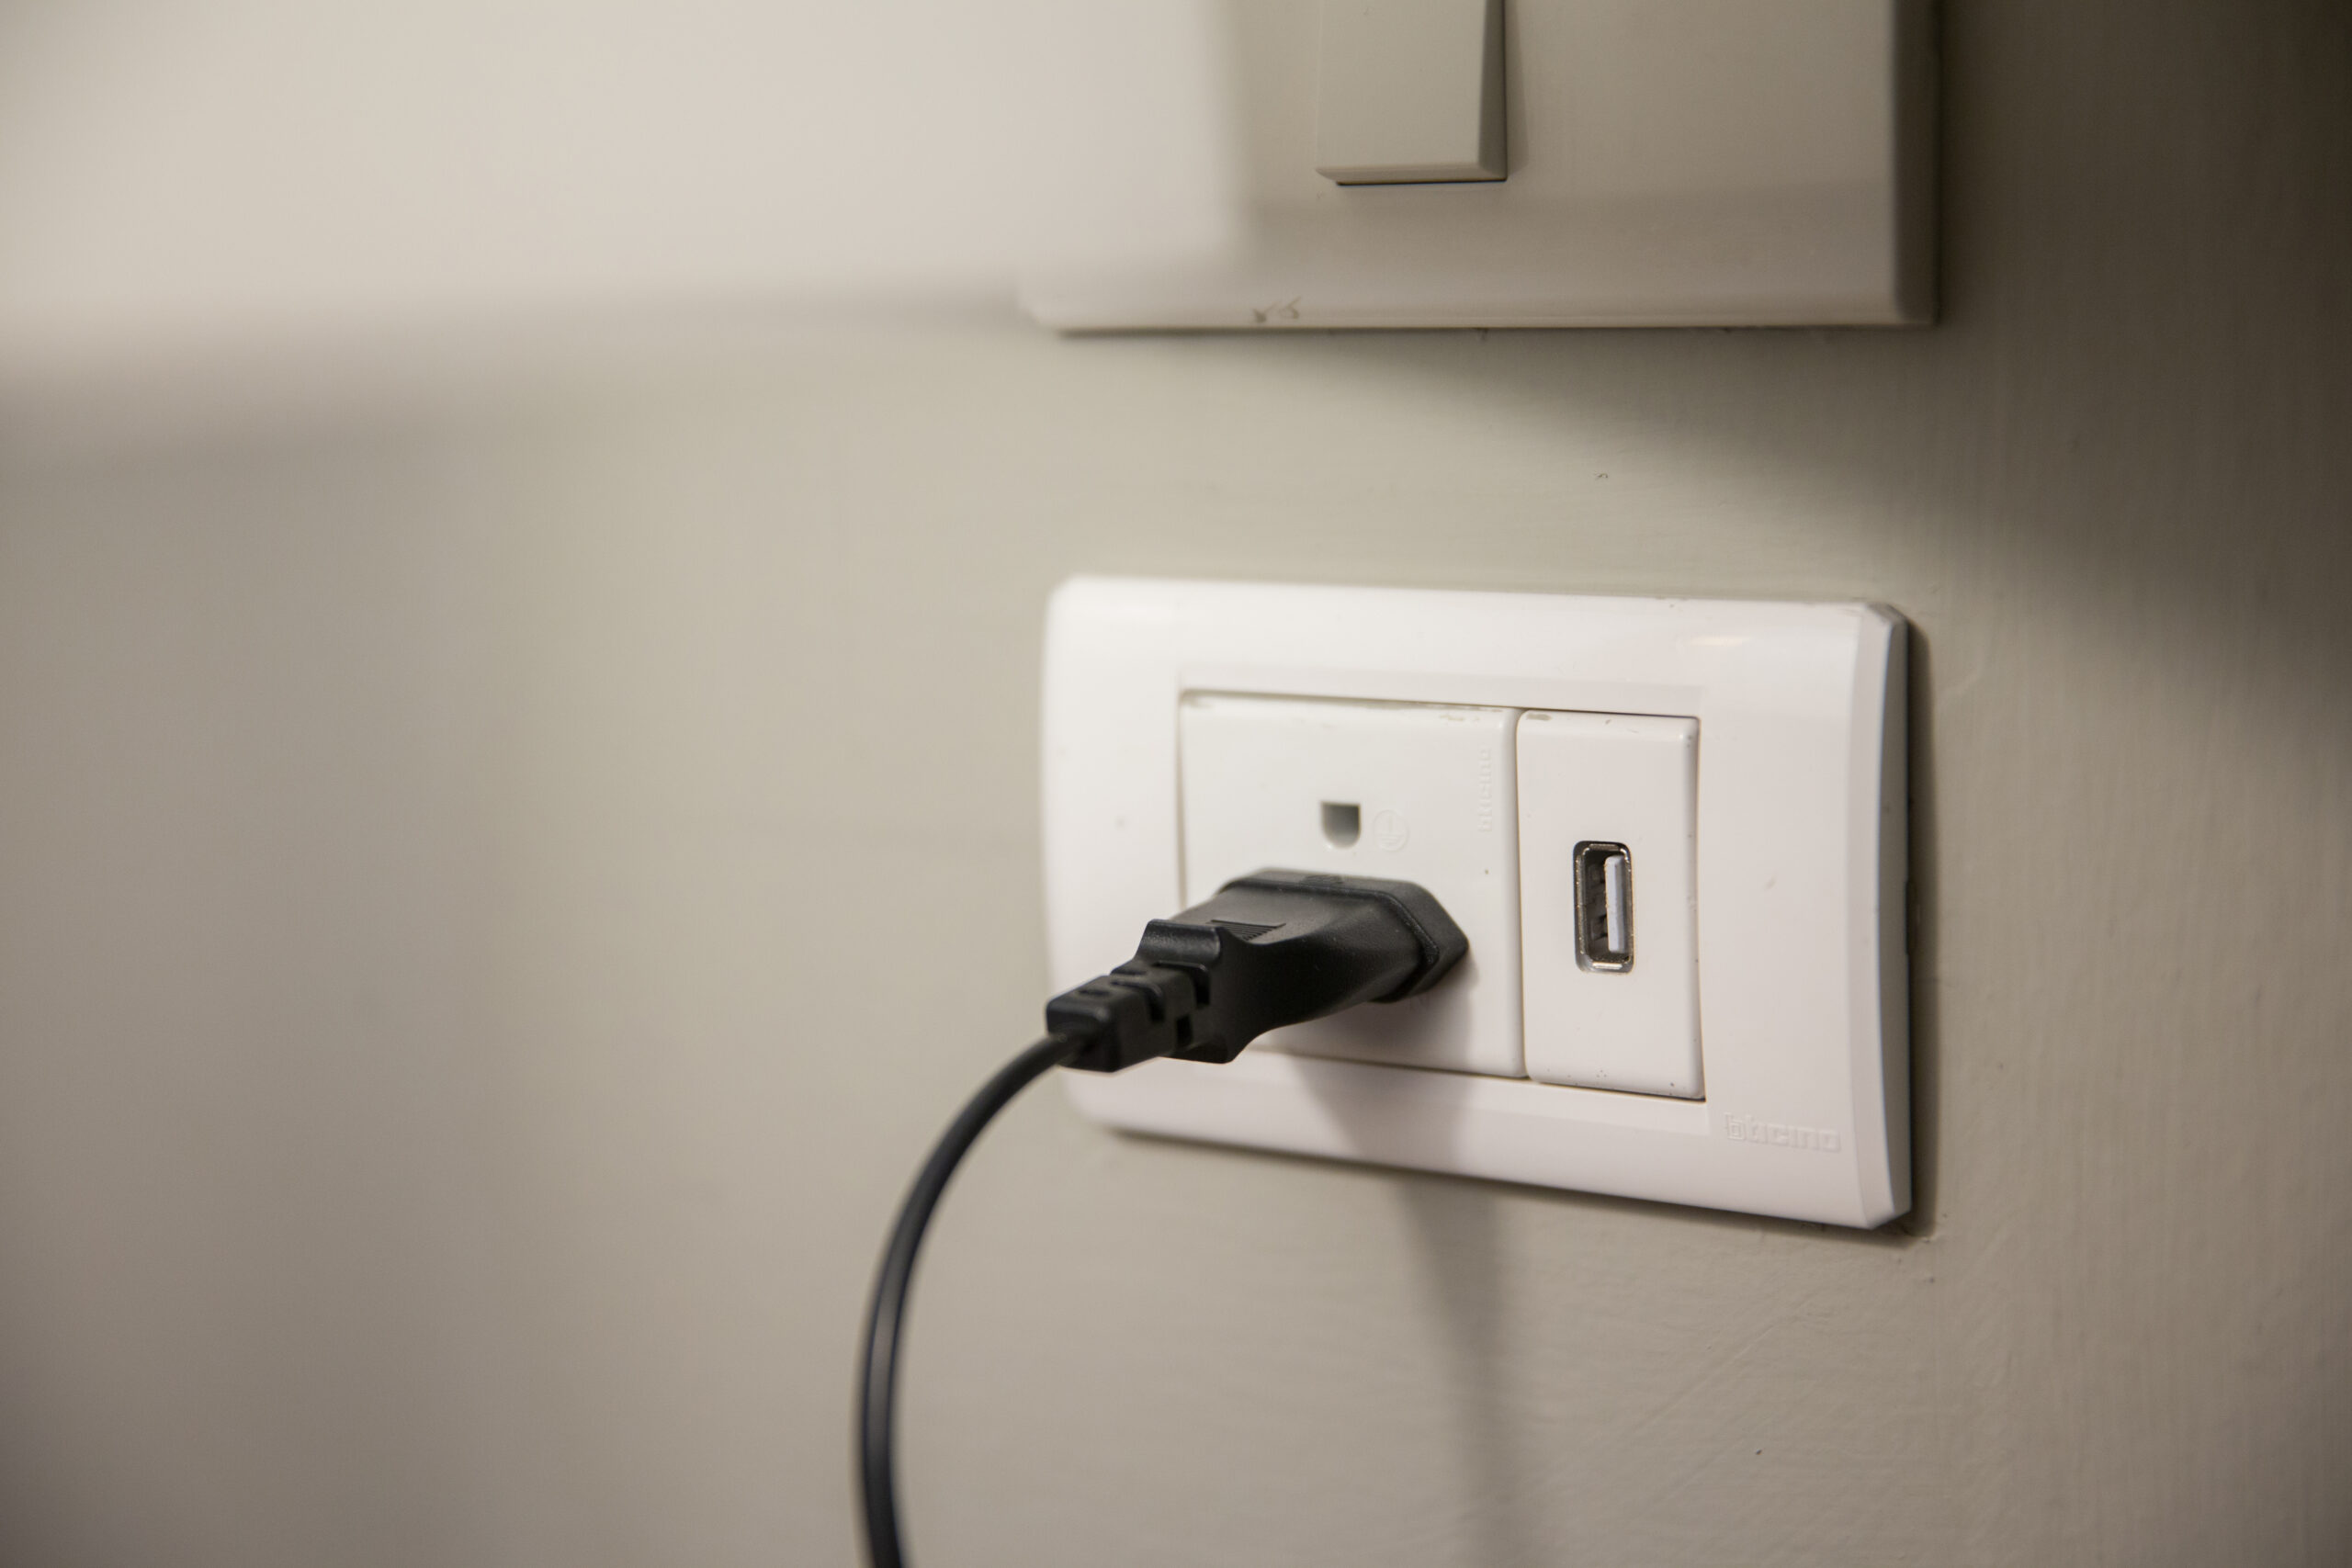 USB ports on outlet